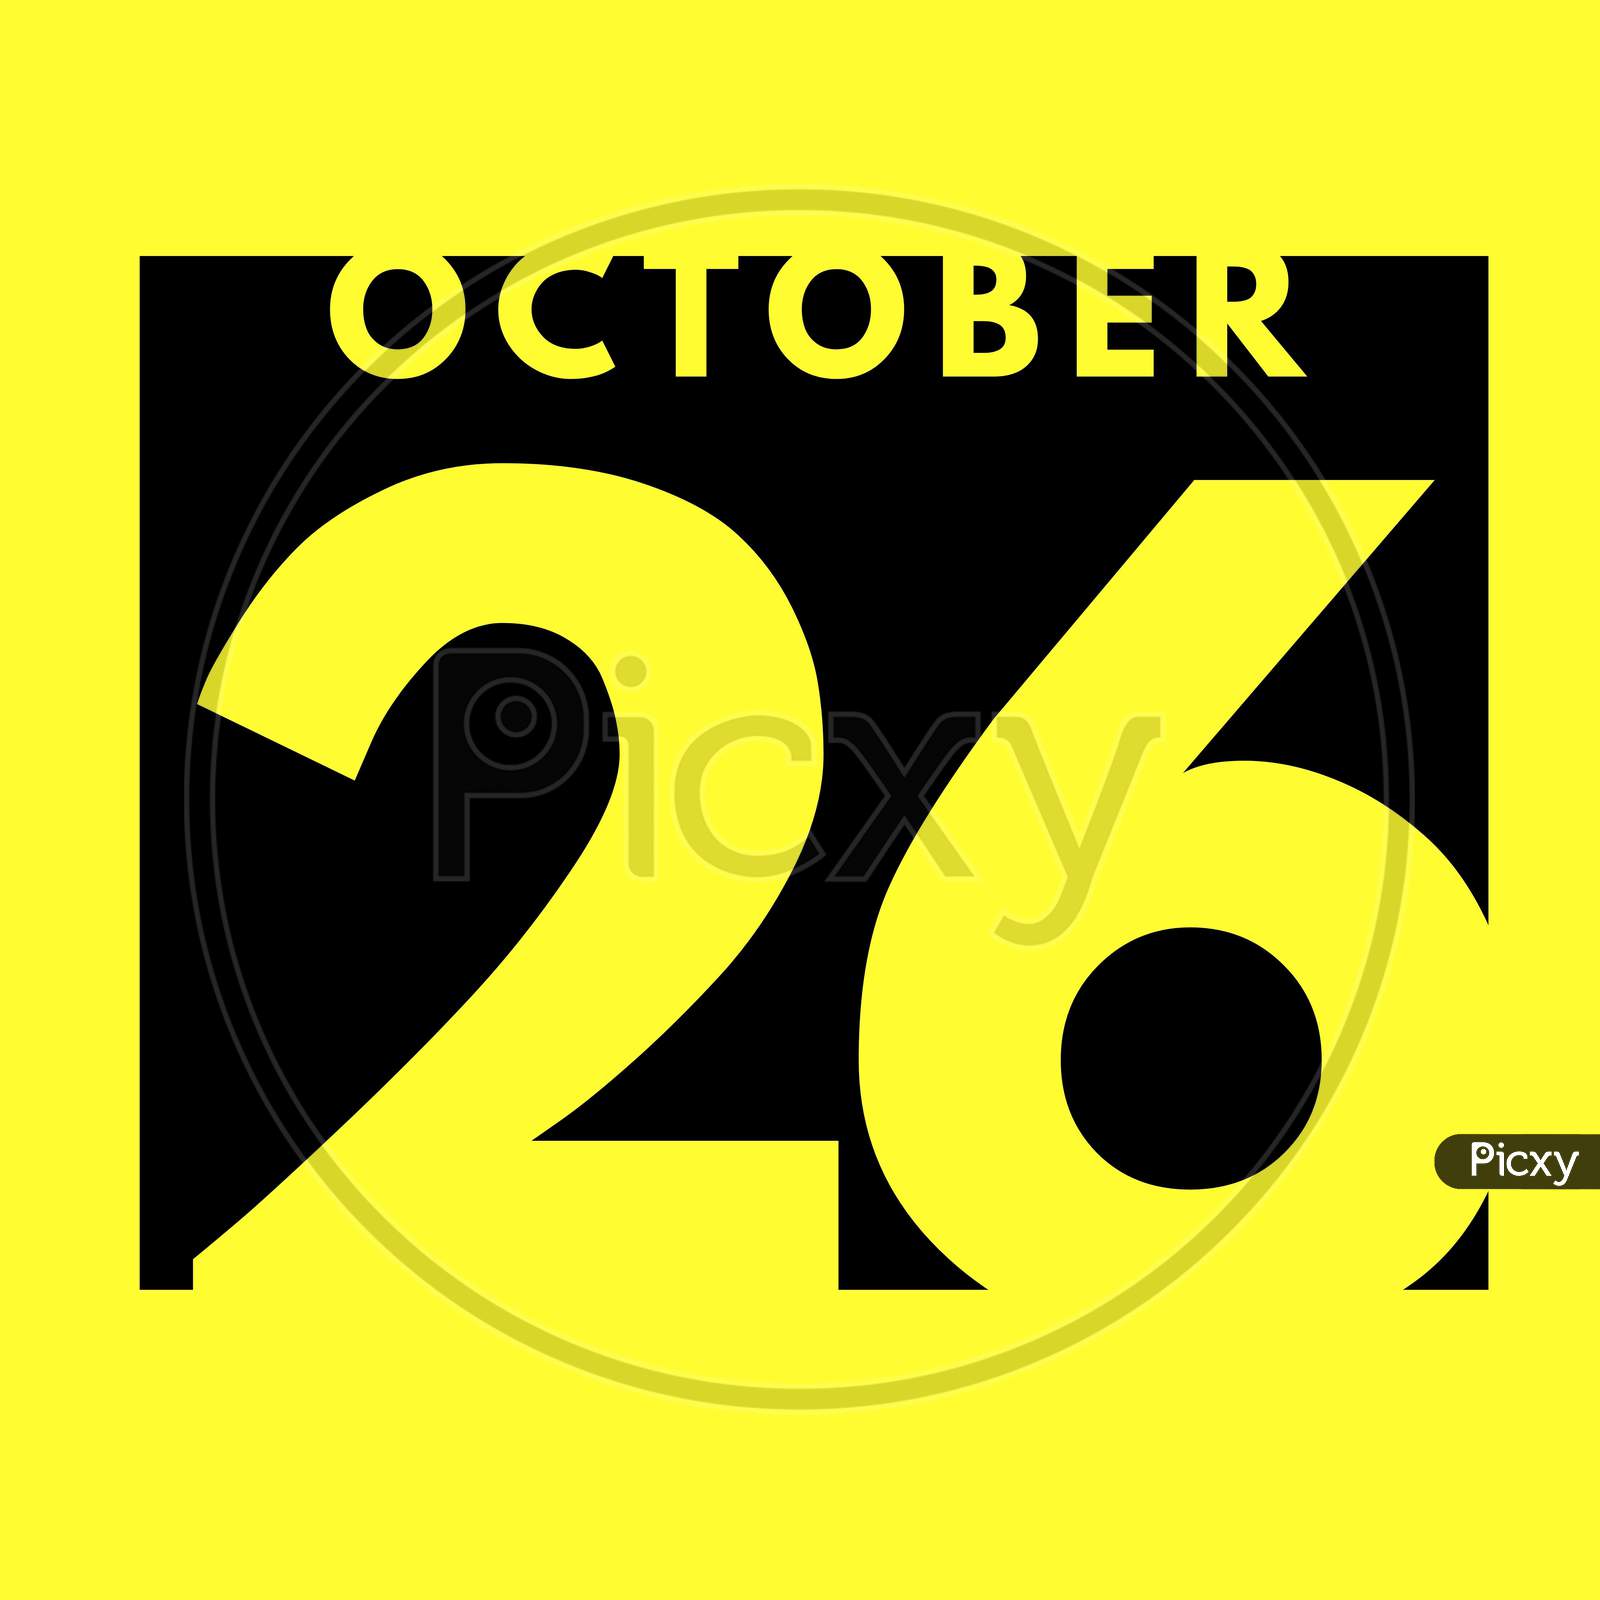 October 26 . Flat Modern Daily Calendar Icon .Date ,Day, Month .Calendar For The Month Of October